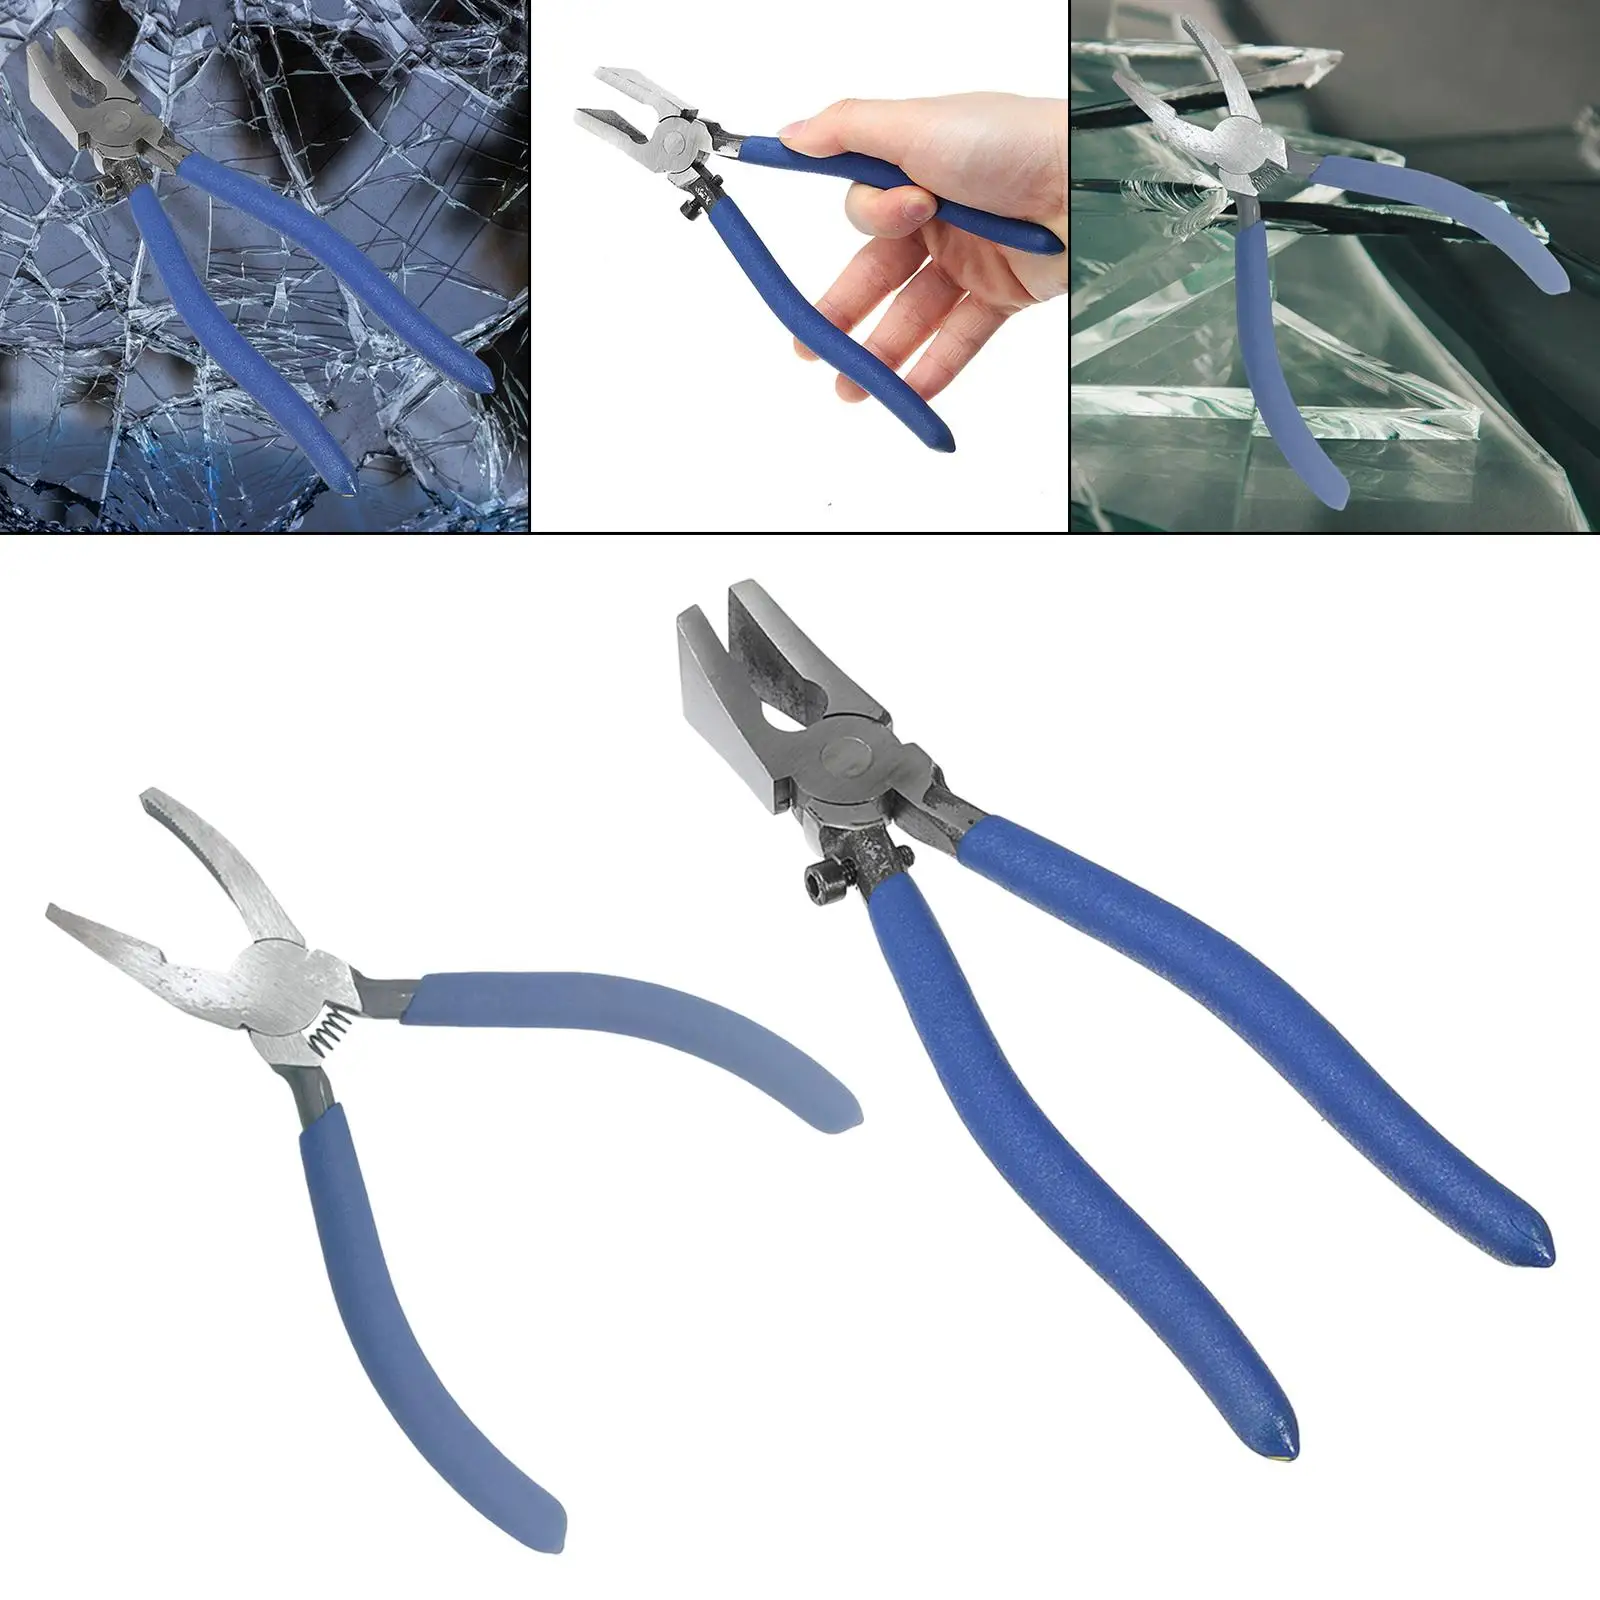 Heavy Duty Key Fob Pliers Tool, Metal Glass Running Pliers With Flat Jaws,  Studio Running Pliers Attach Rubber Tips Perfect For - AliExpress